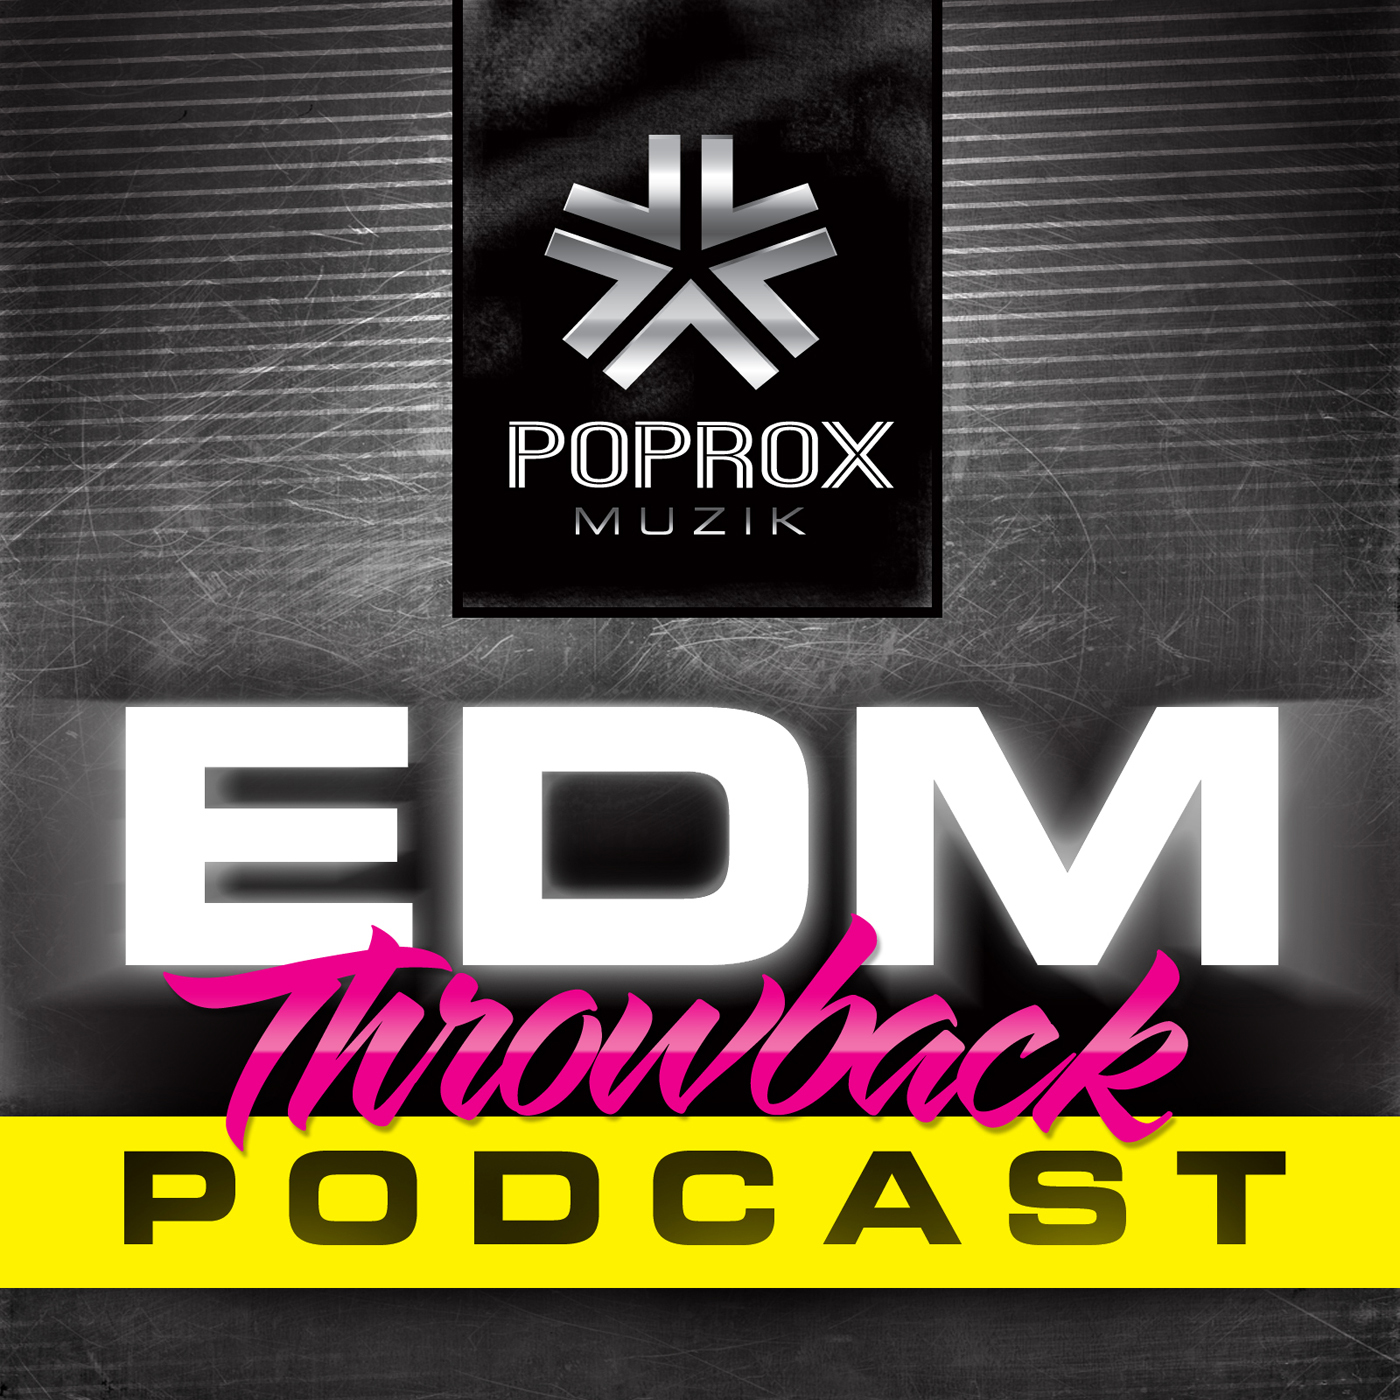 Best Pop Rox Edm Nation Podcast Network Podcasts Most Downloaded Episodes